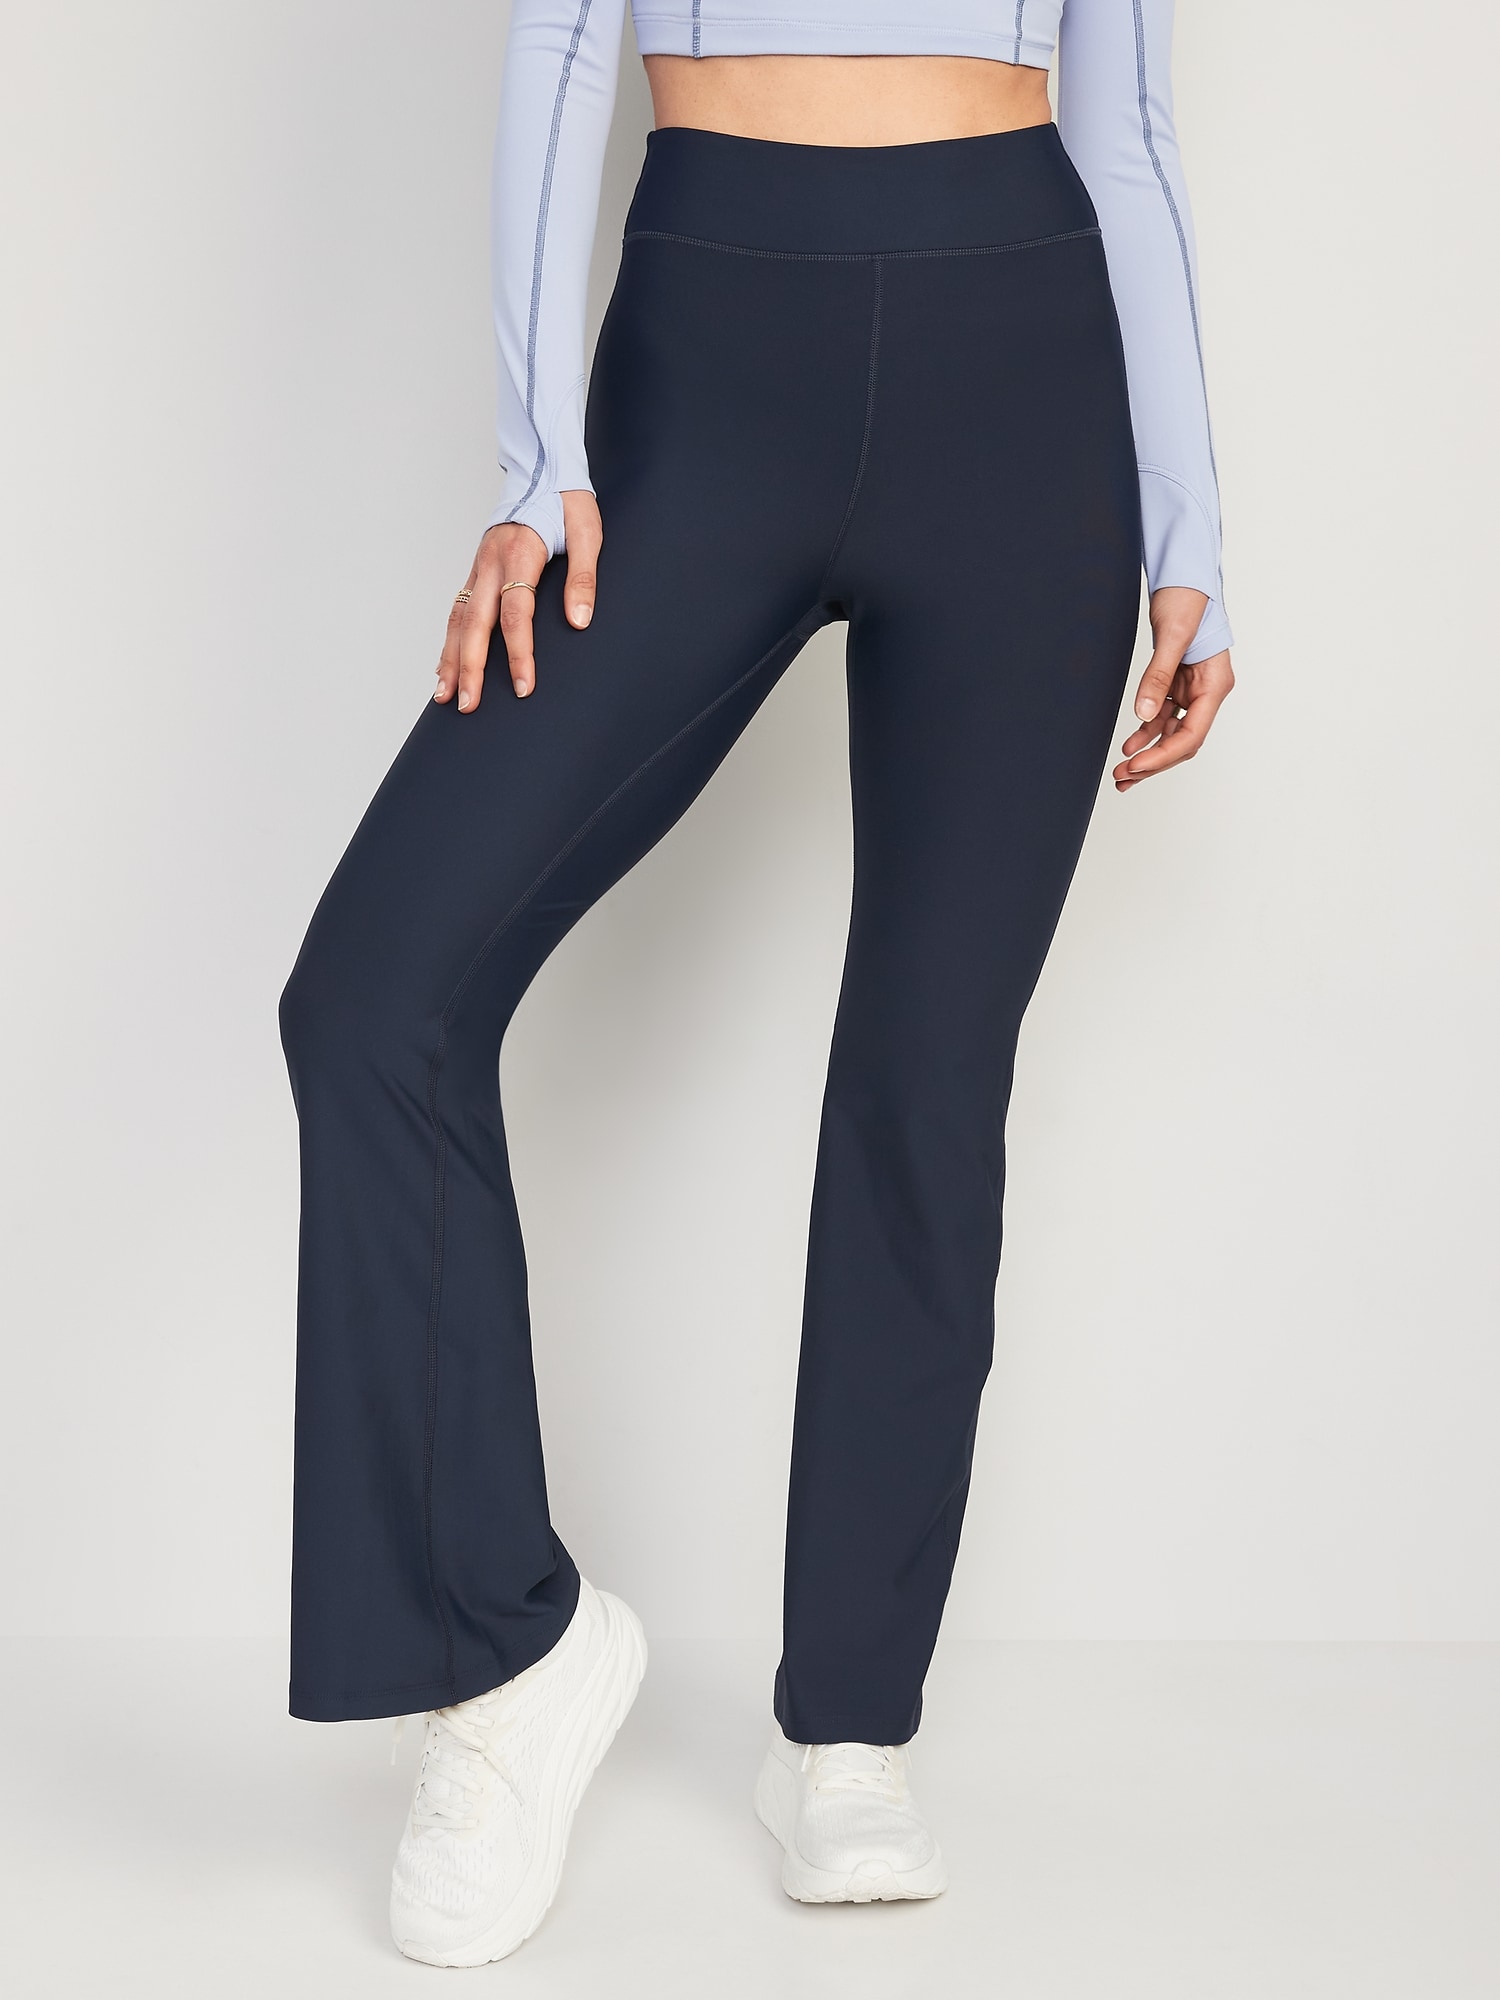 Old Navy Extra High-Waisted PowerSoft Flare Leggings for Women blue. 1